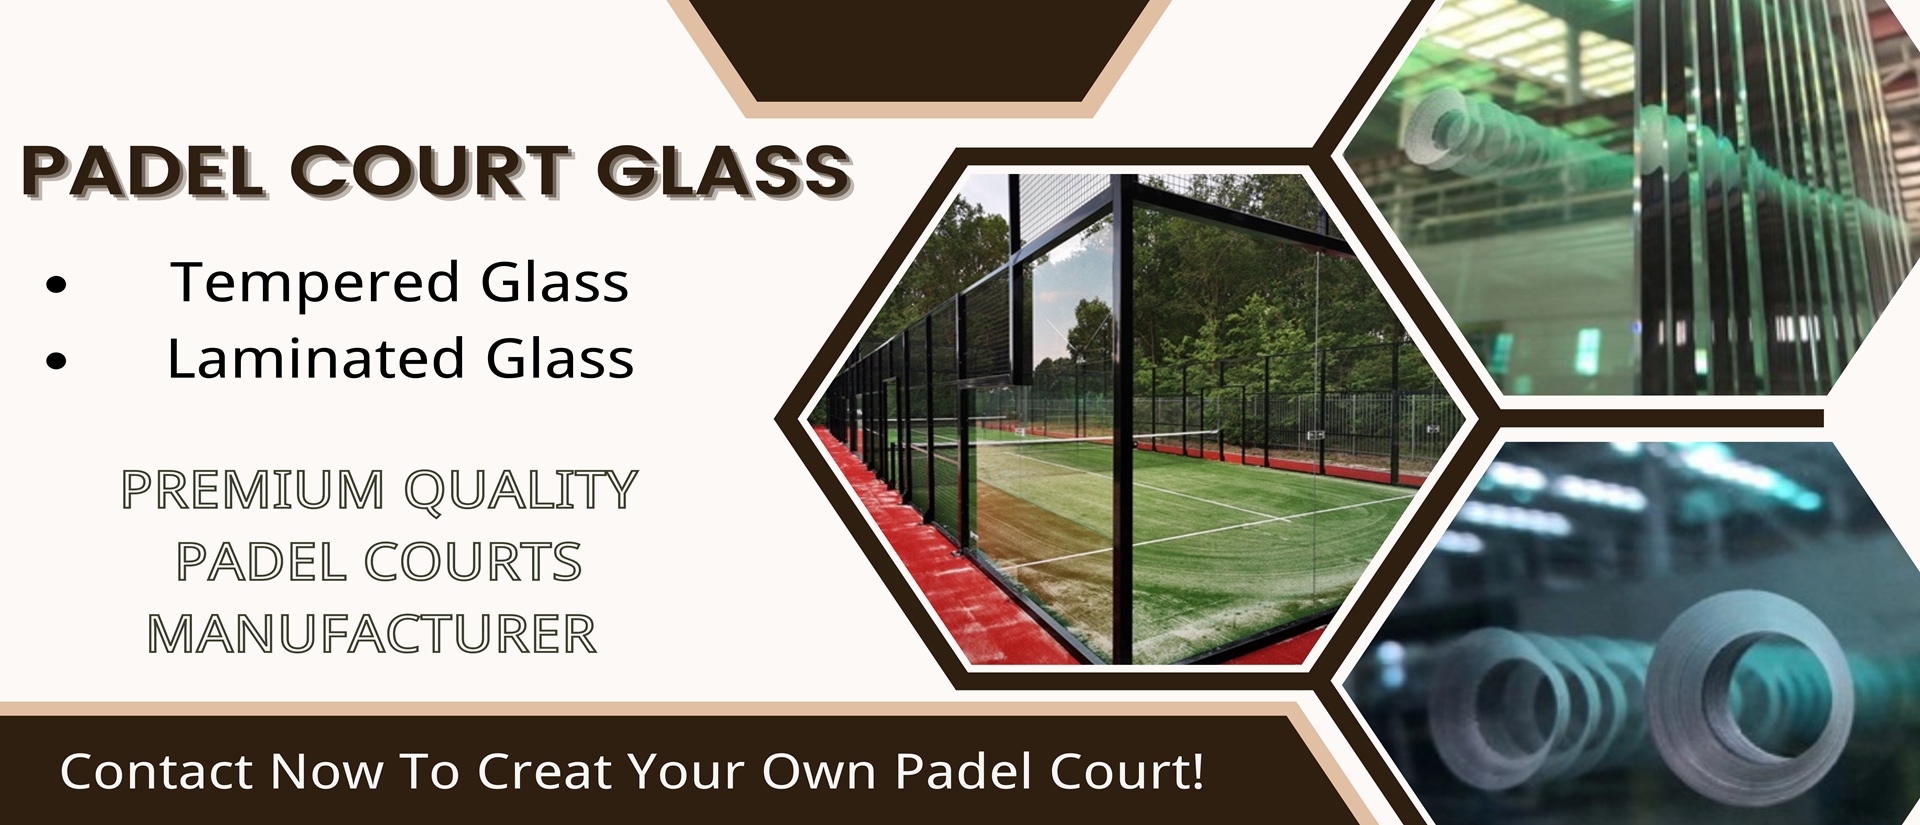 Padel tennis court with tempered glass